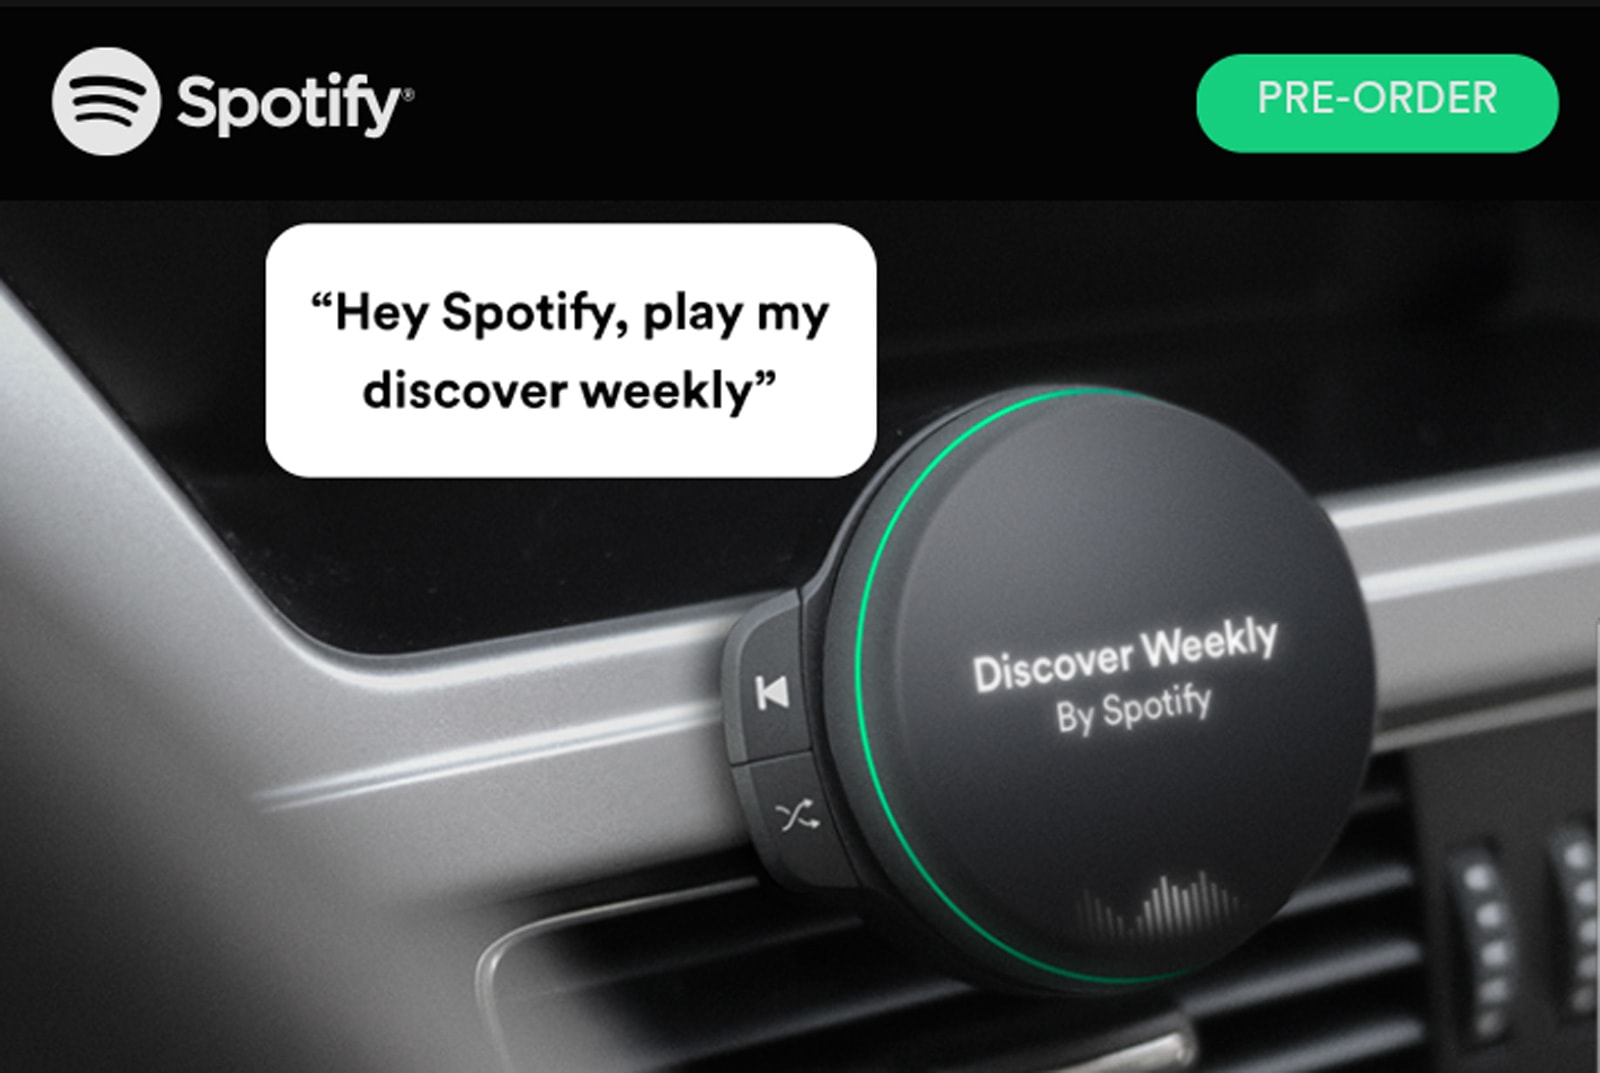 Concept of an in-car Spotify device